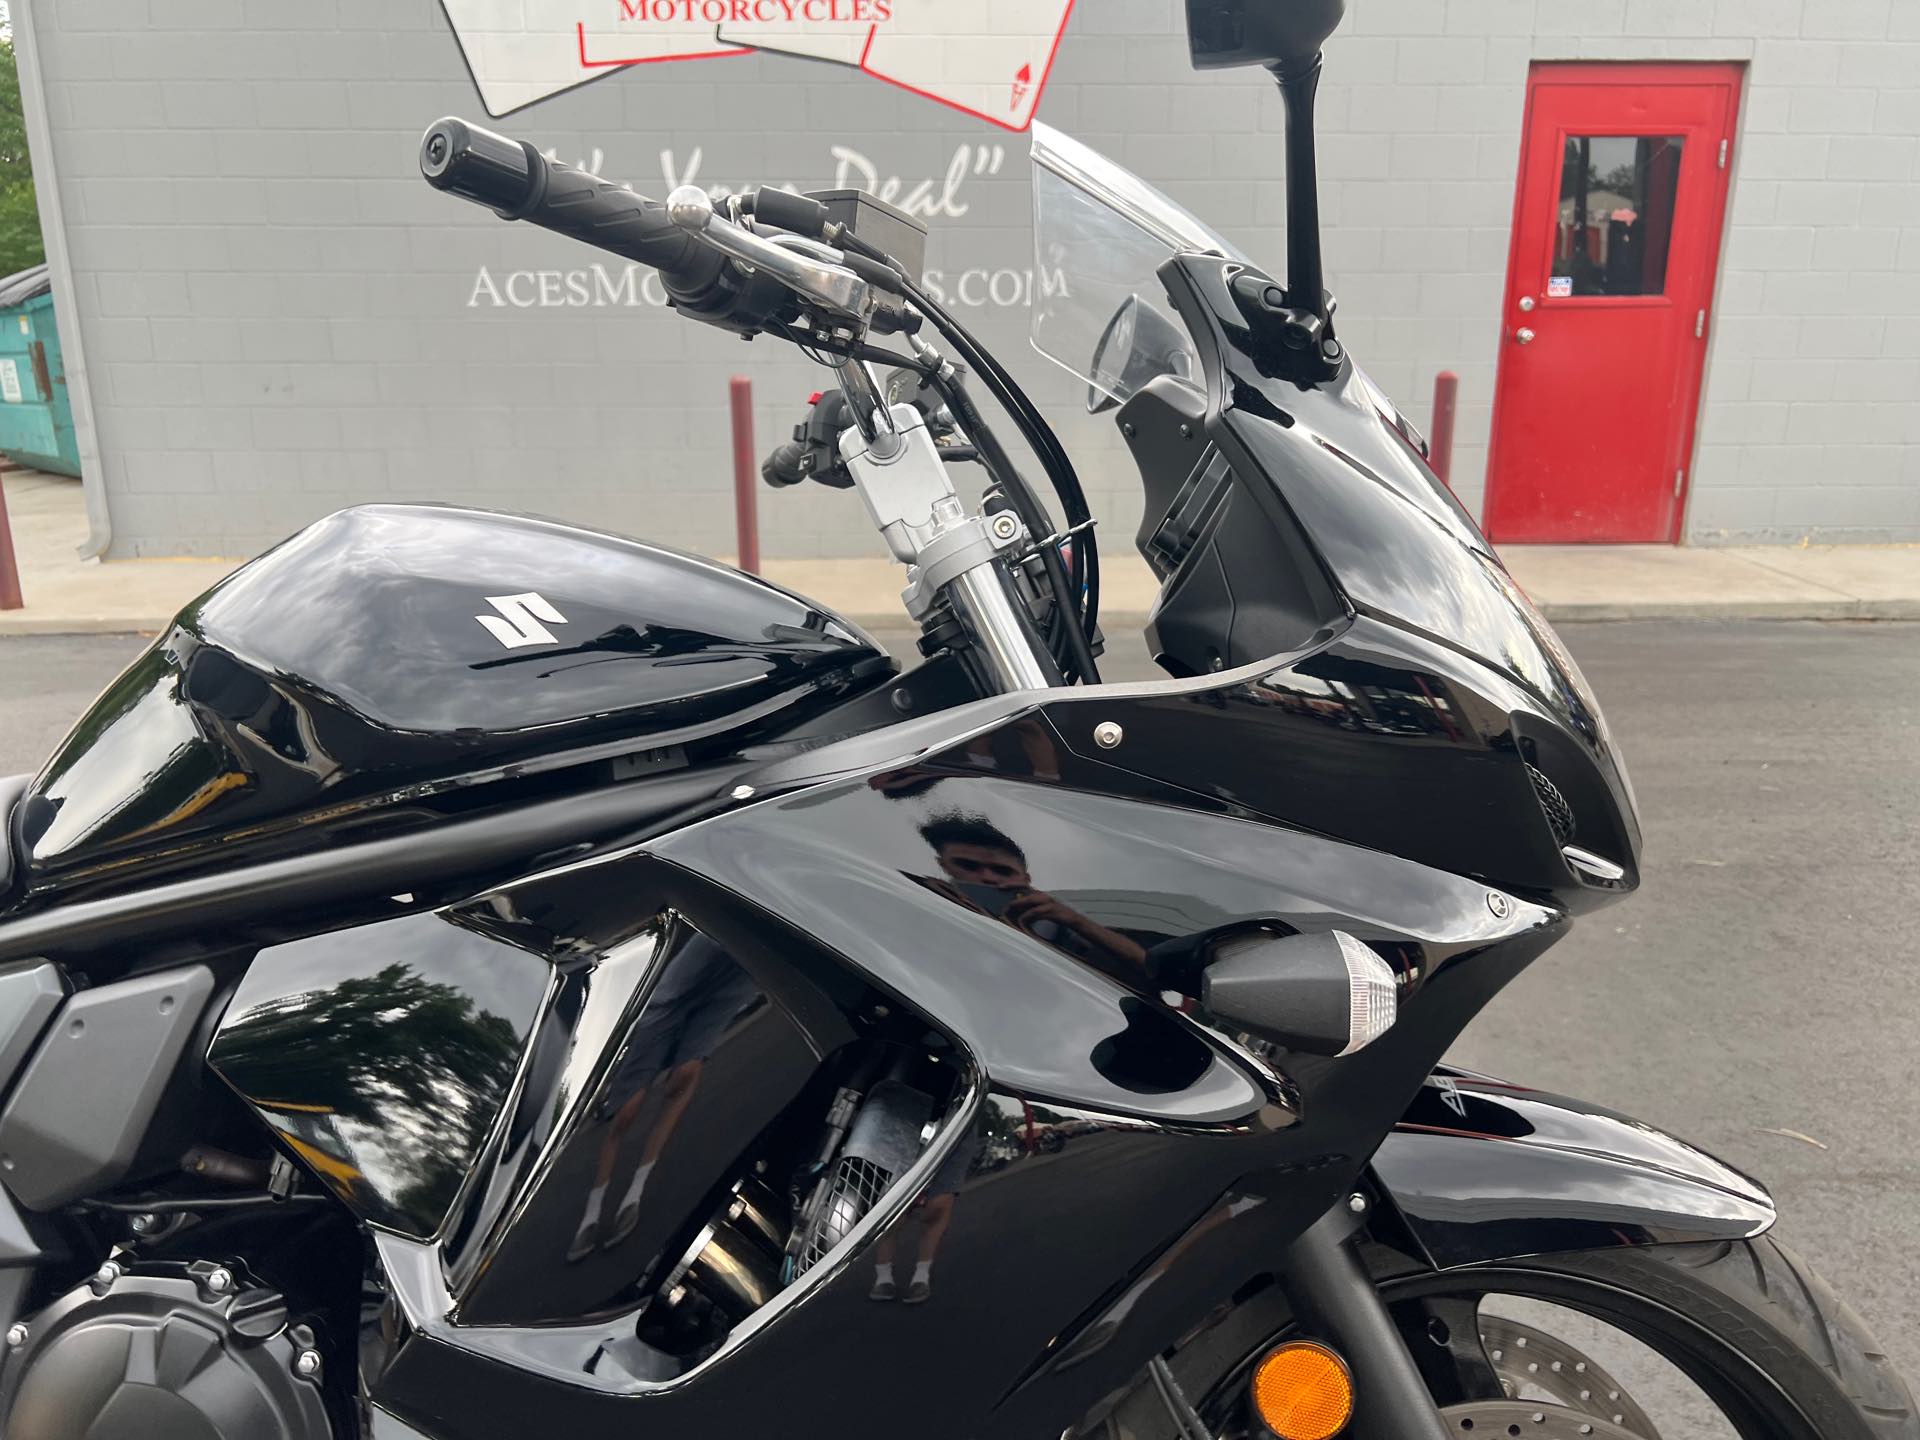 2011 Suzuki GSX 1250FA at Aces Motorcycles - Fort Collins